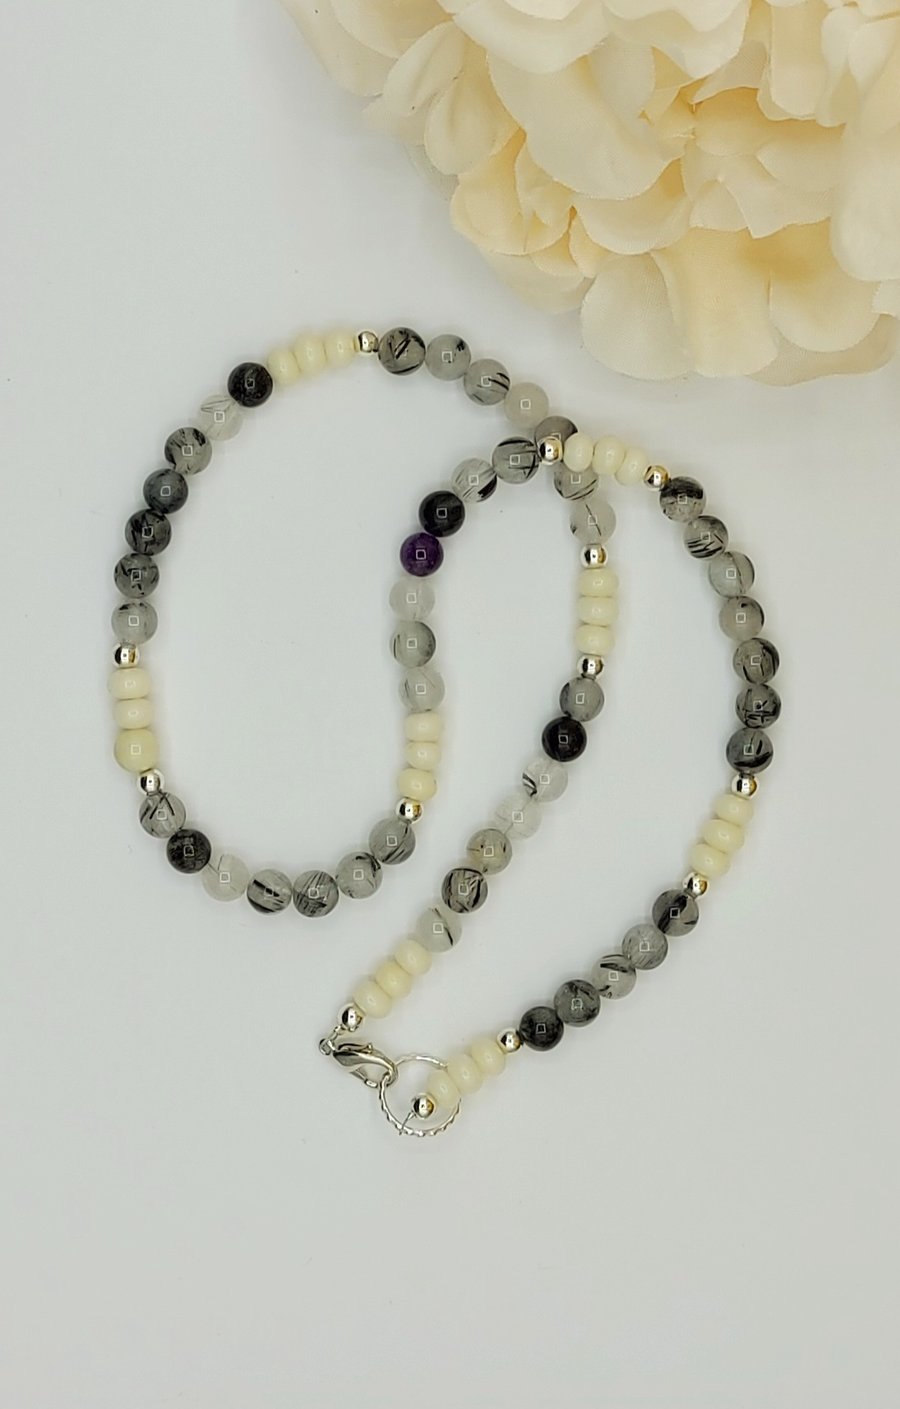  BLACK RUTILE AND IVORY AGATE GEMSTONE NECKLACE